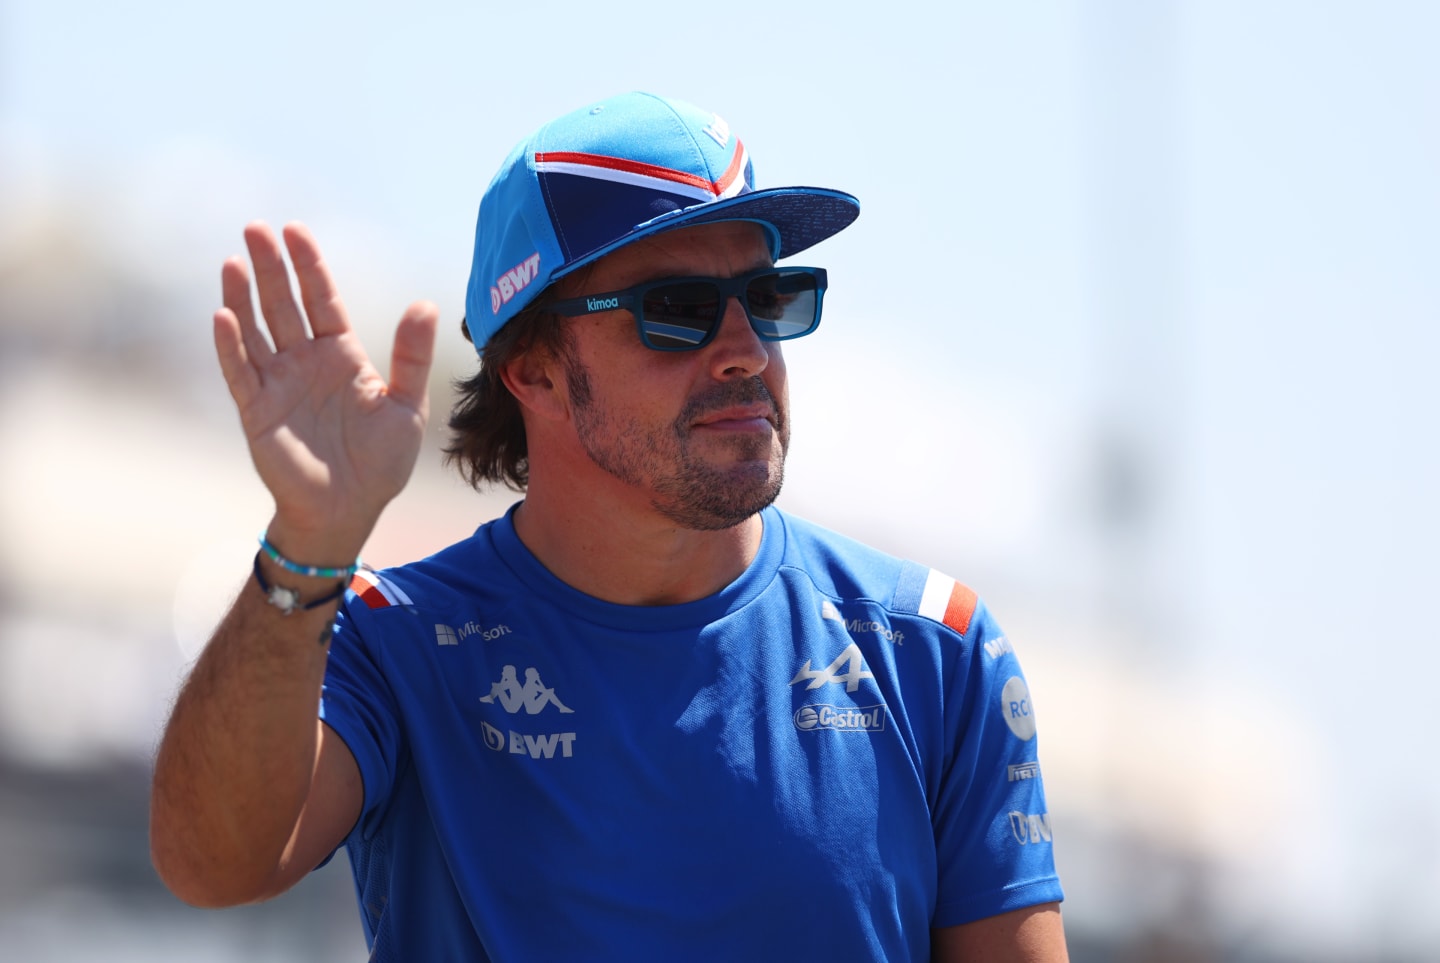 LE CASTELLET, FRANCE - JULY 24: Fernando Alonso of Spain and Alpine F1 waves to the crowd on the drivers parade ahead of the F1 Grand Prix of France at Circuit Paul Ricard on July 24, 2022 in Le Castellet, France. (Photo by Clive Rose/Getty Images)